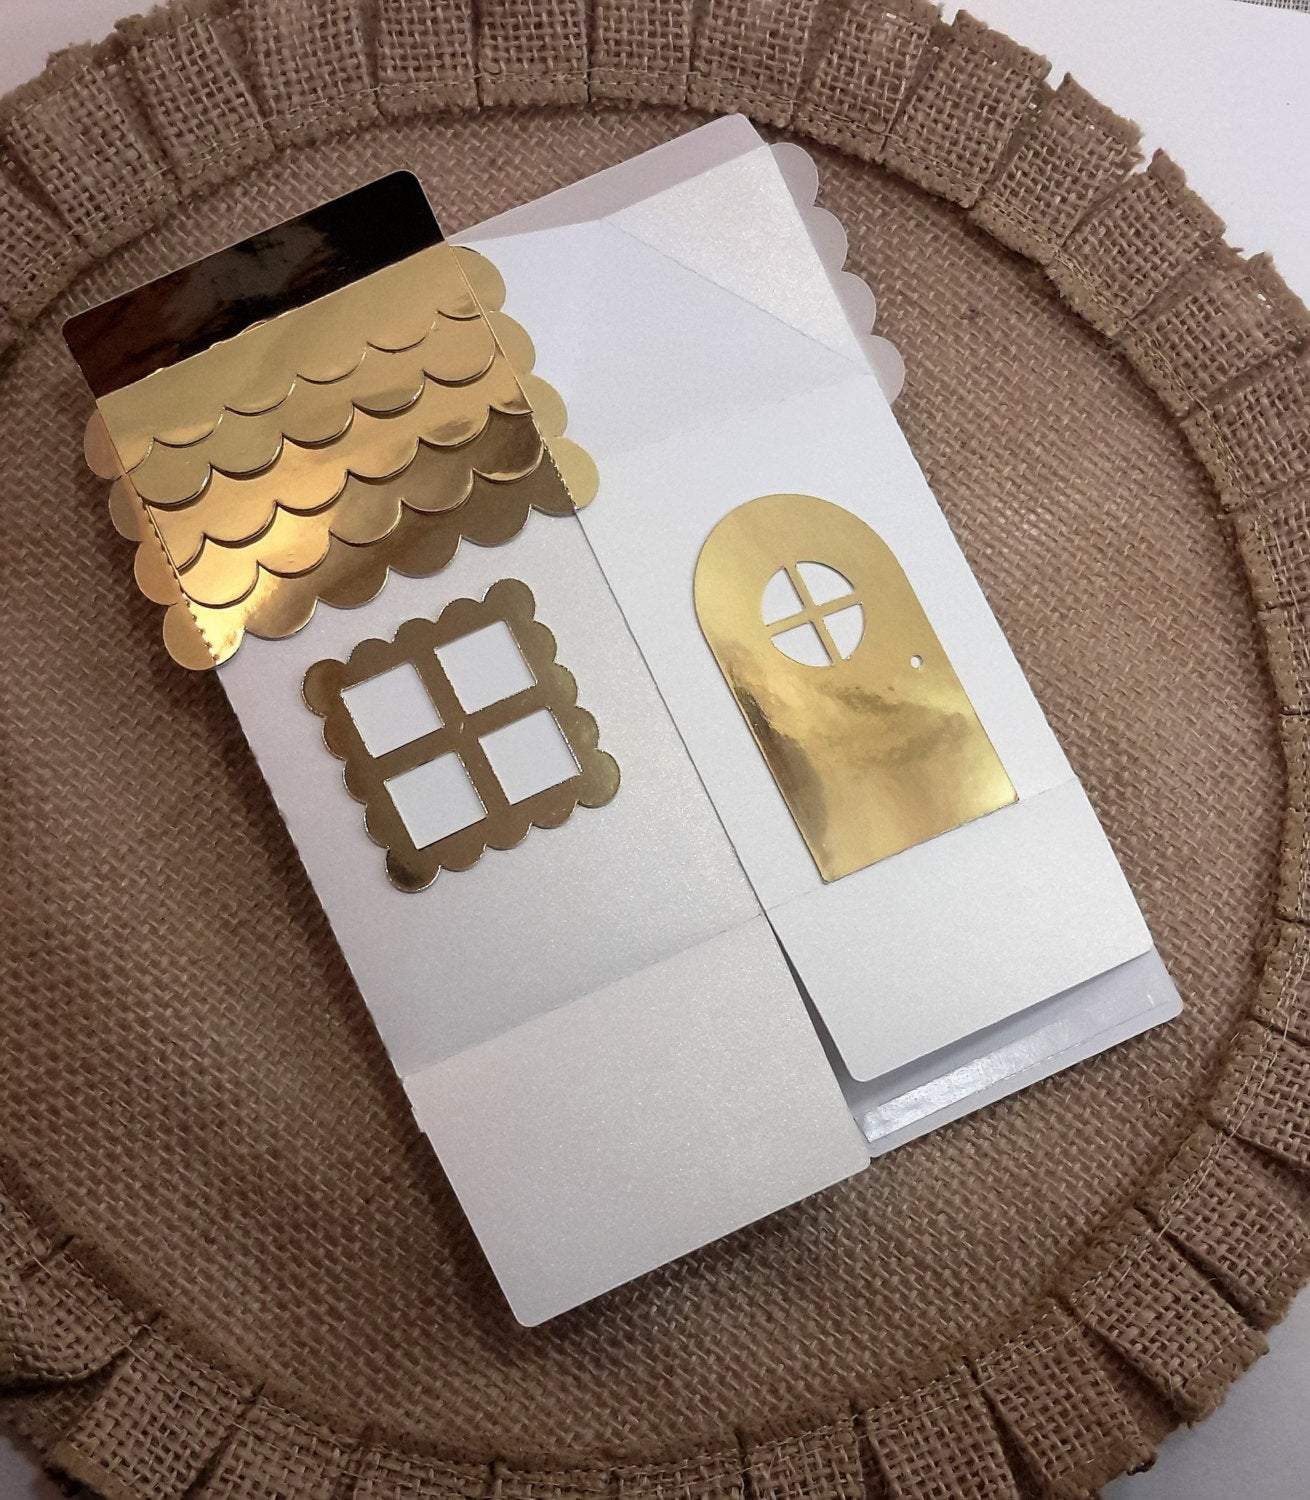 Adriana Ortiz Designs Favor Boxes Gold Little House Christmas Boxes.